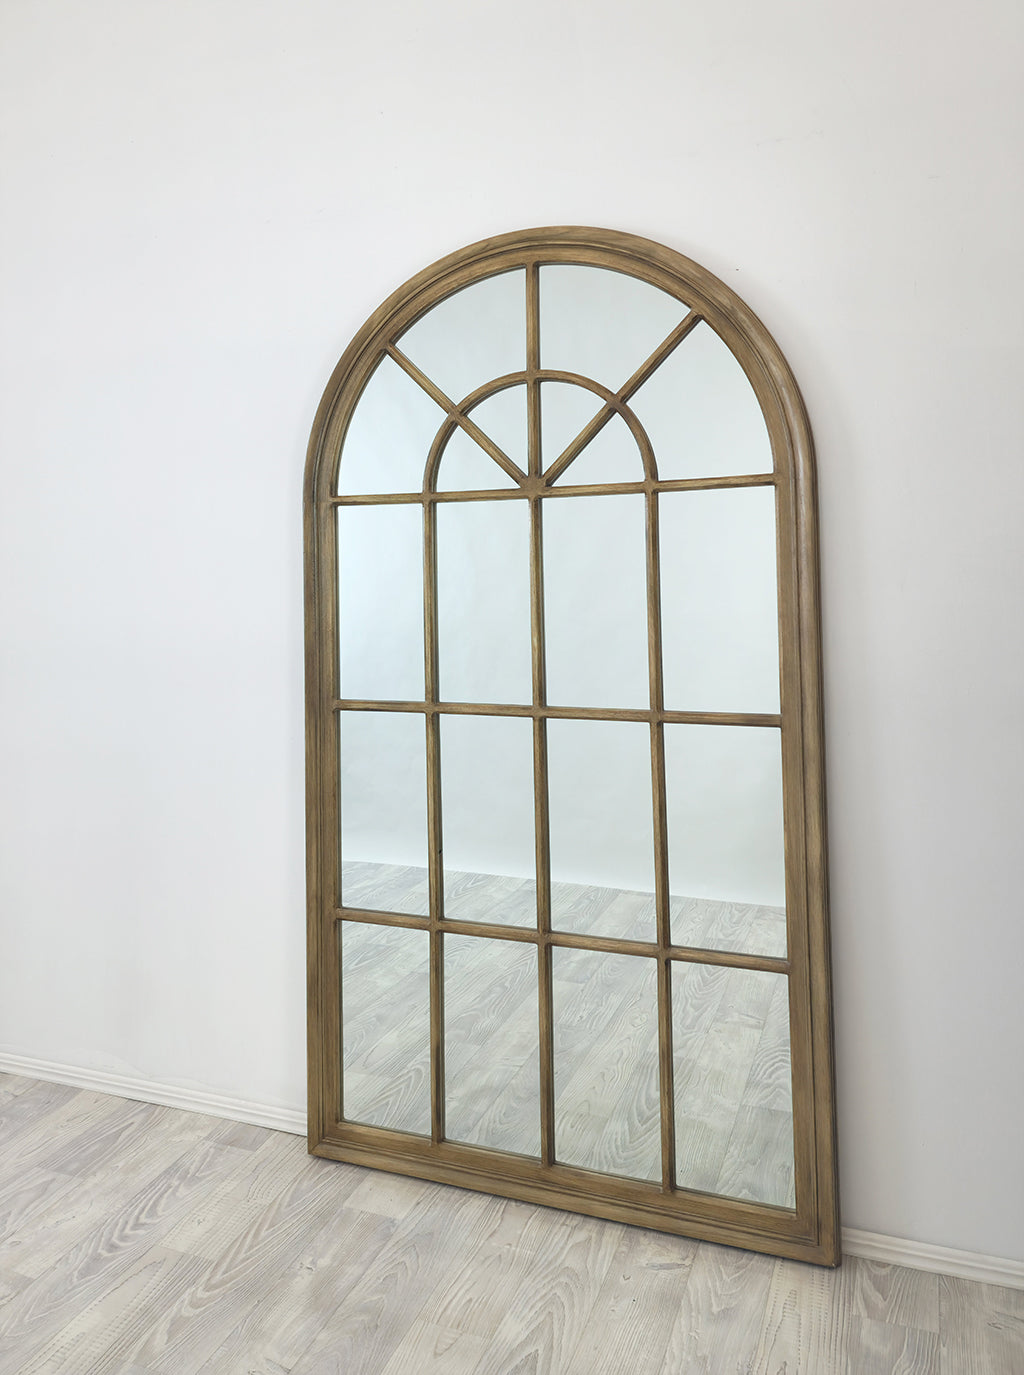 X-Large Window Style Mirror - Taupe Arch 100 CM x 180 CM